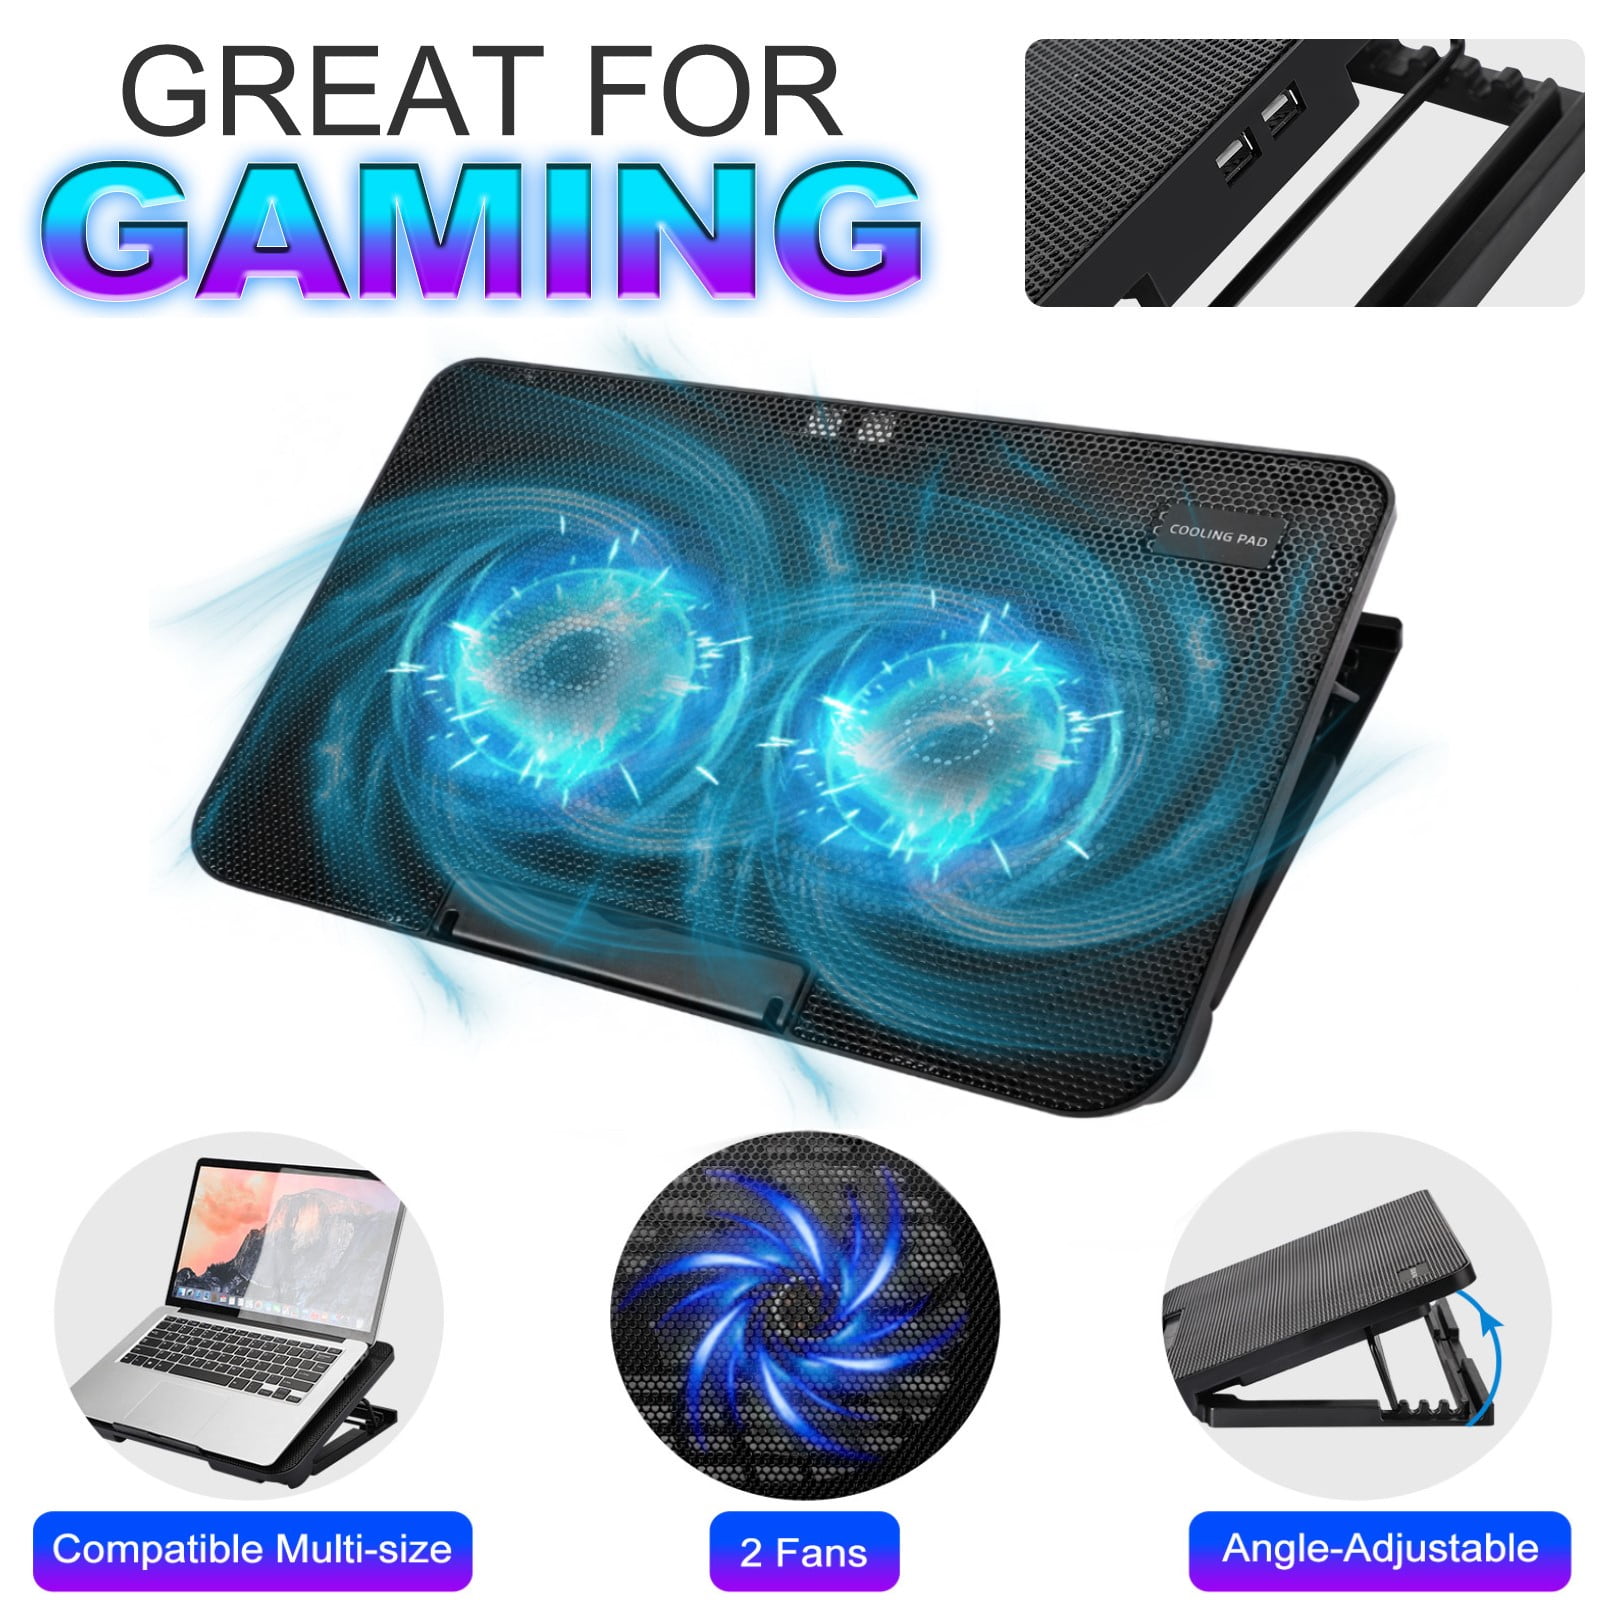 17 Inches USB Laptop Cooler,B Multi-Angle Adjustment Six Fans Touch Screen Portable Buttons Computer Base Station Laptop Radiator